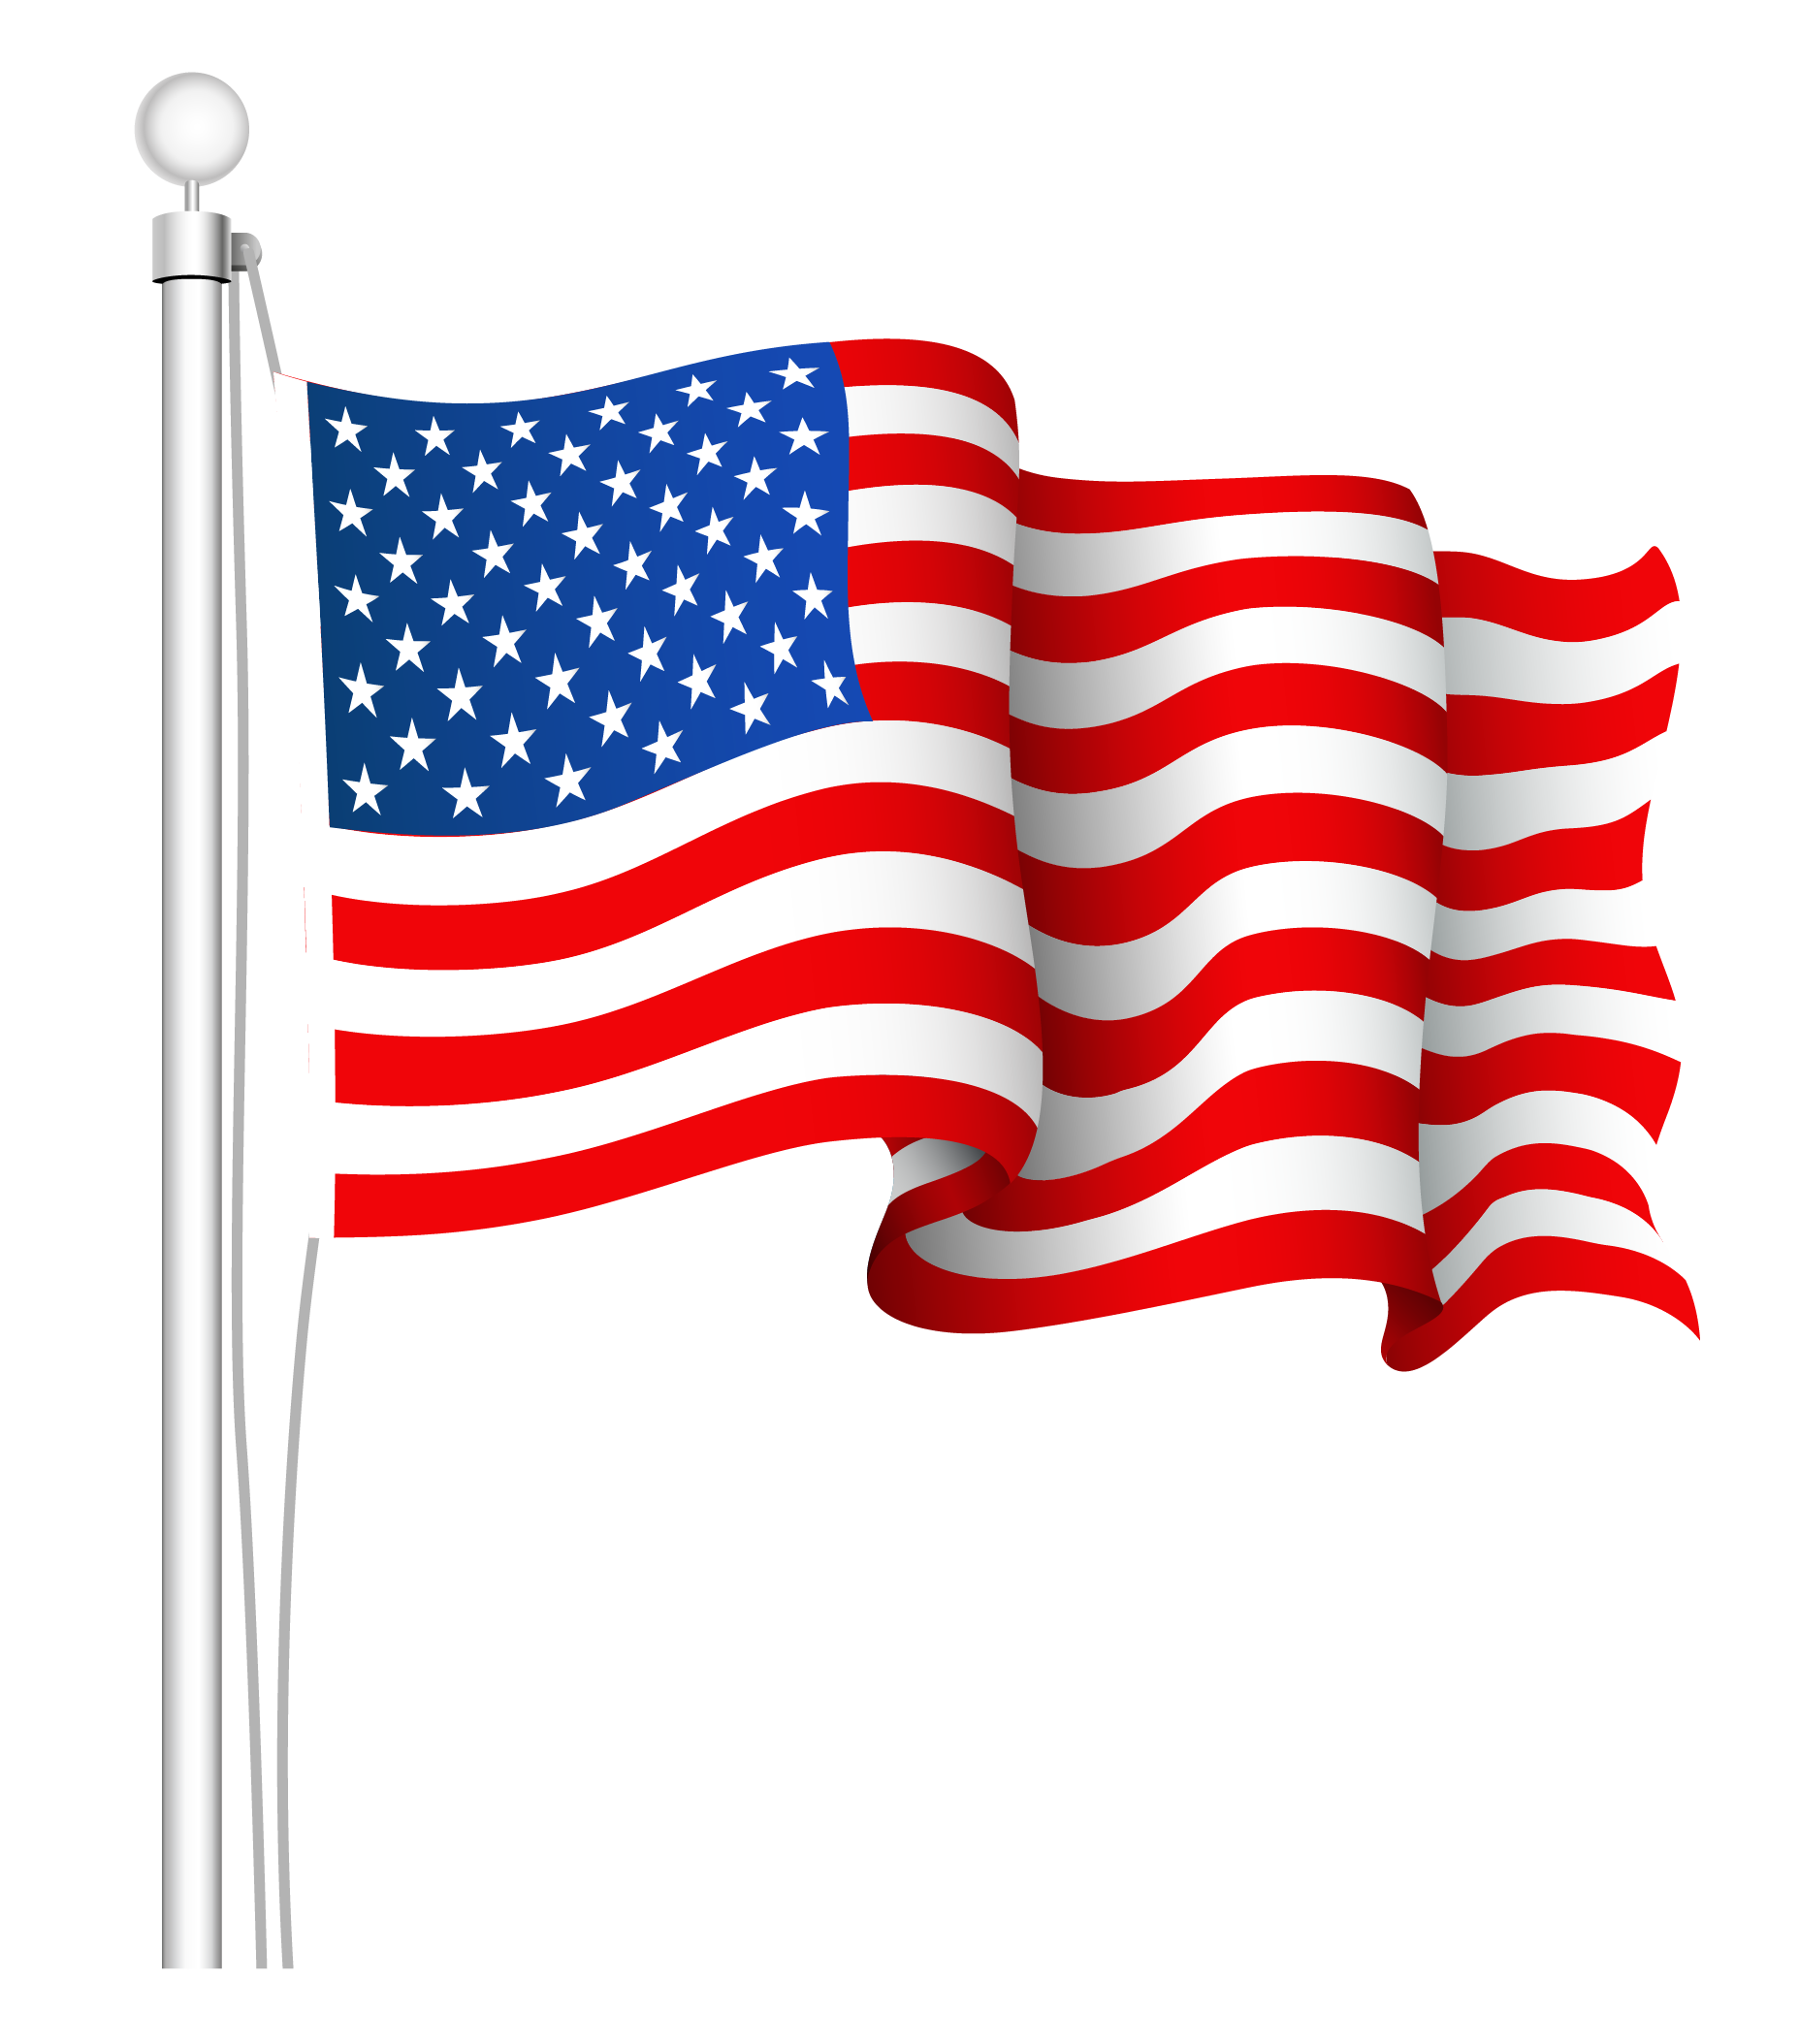 clip art of american flag animated - photo #31